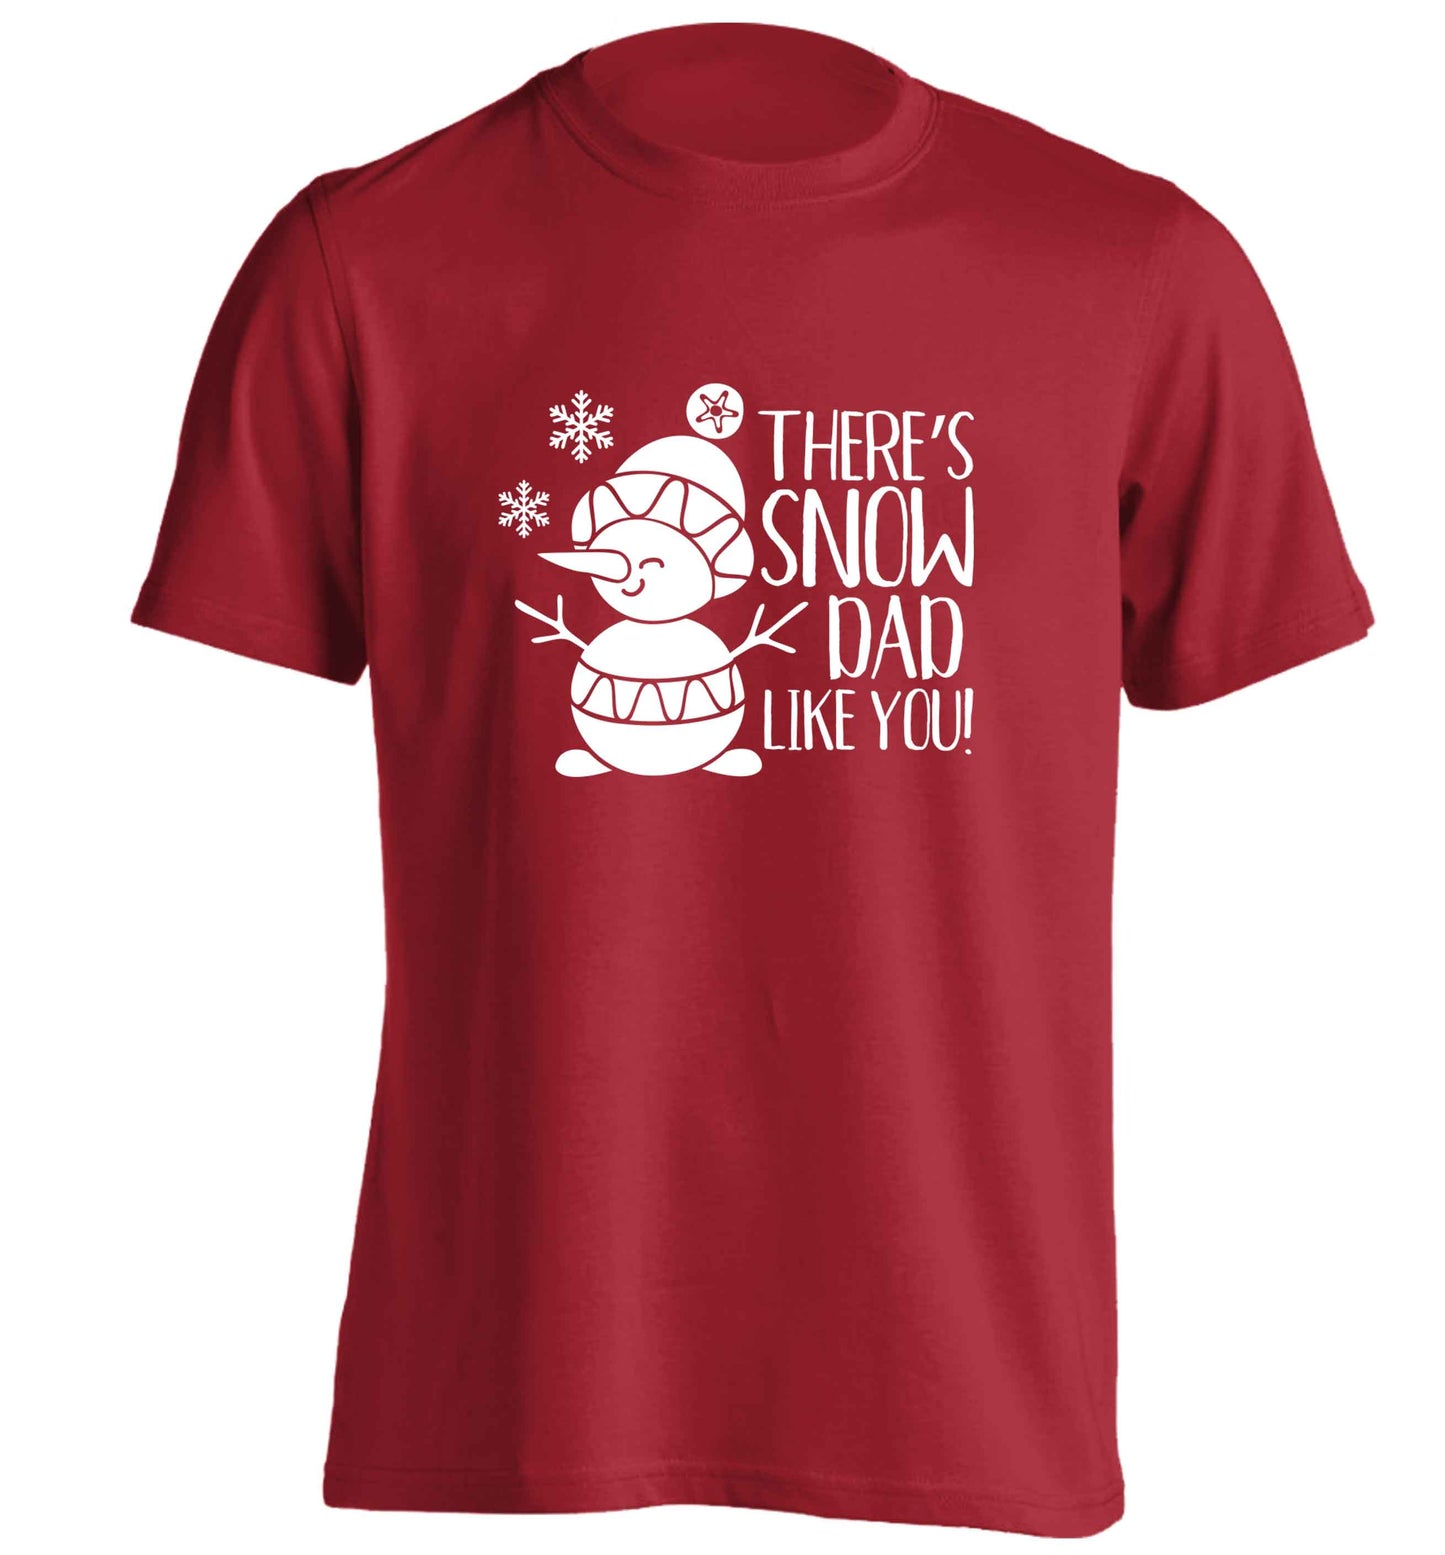 There's snow dad like you adults unisex red Tshirt 2XL